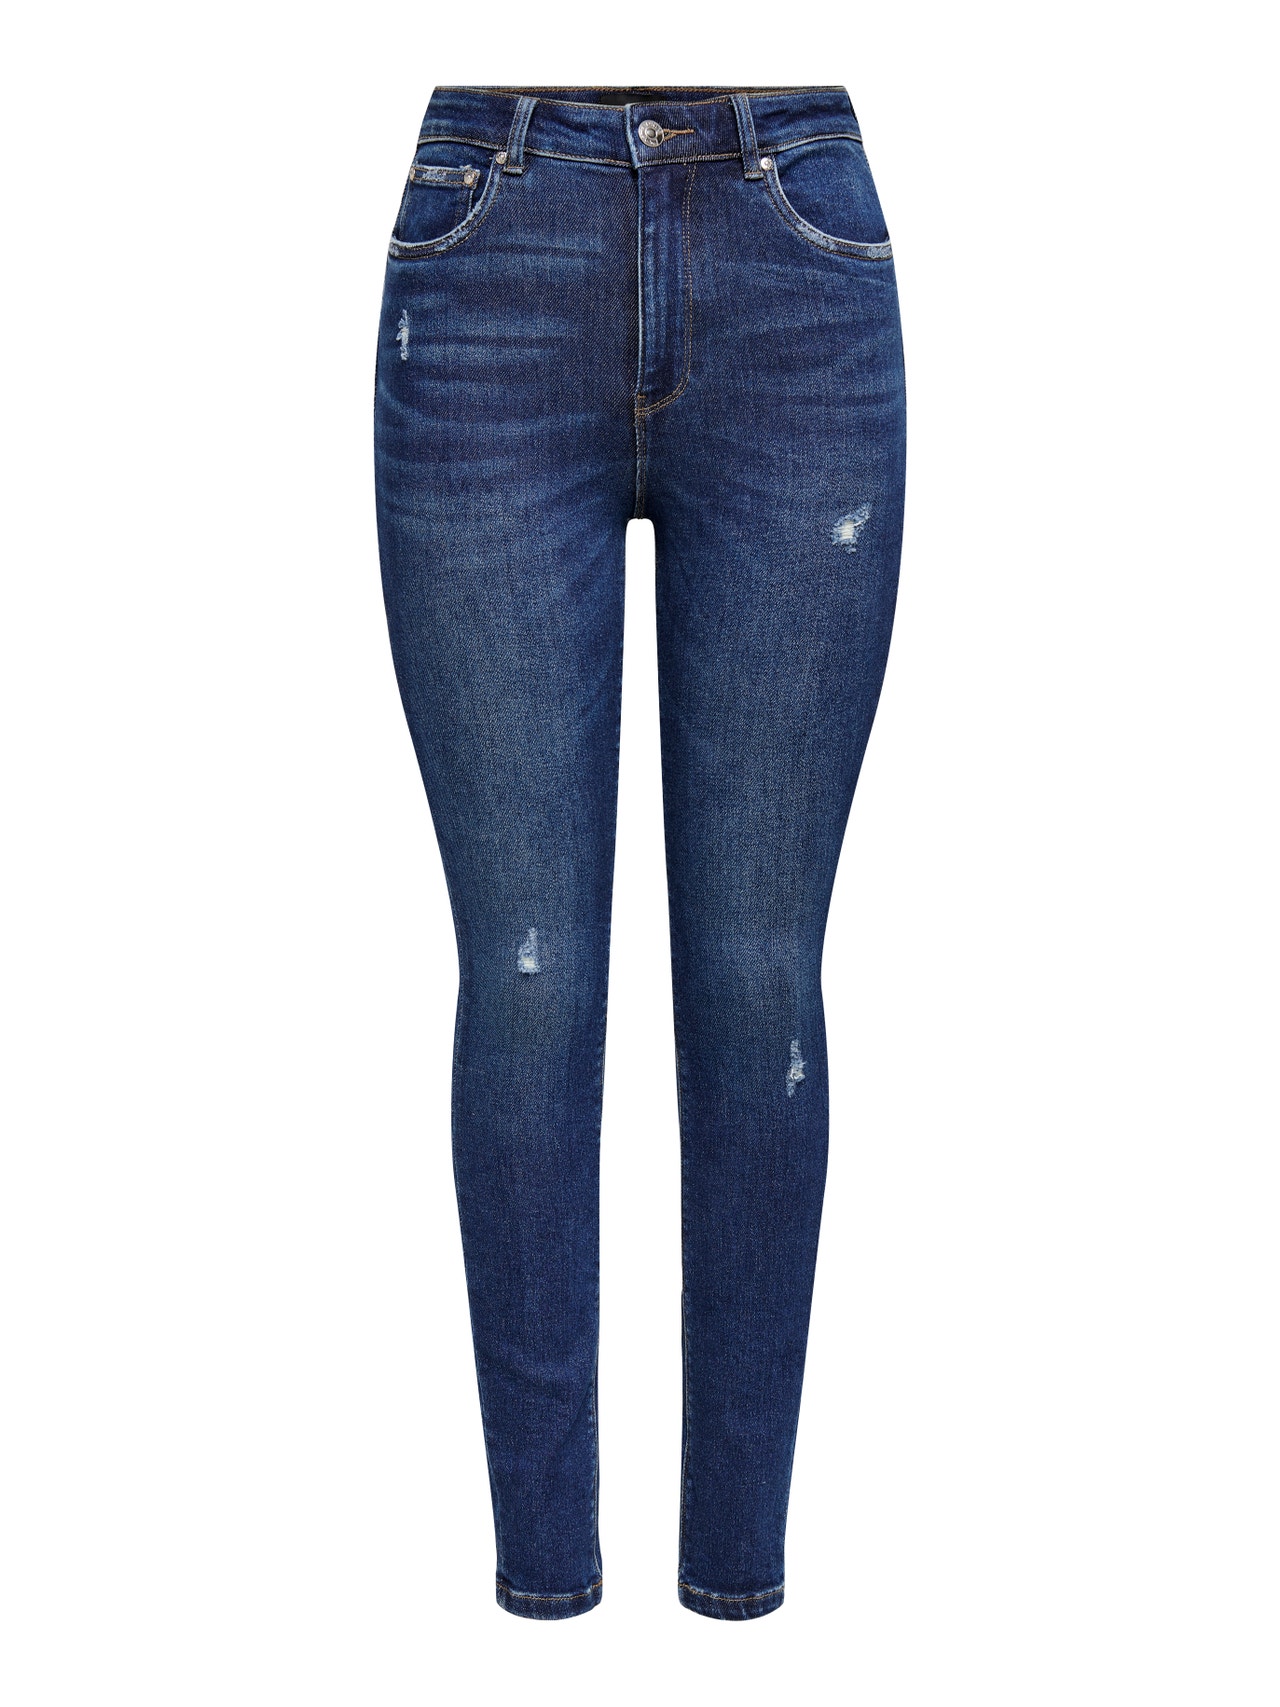 ONLY Jeans Skinny Fit Taille haute -Dark Blue Denim - 15209155